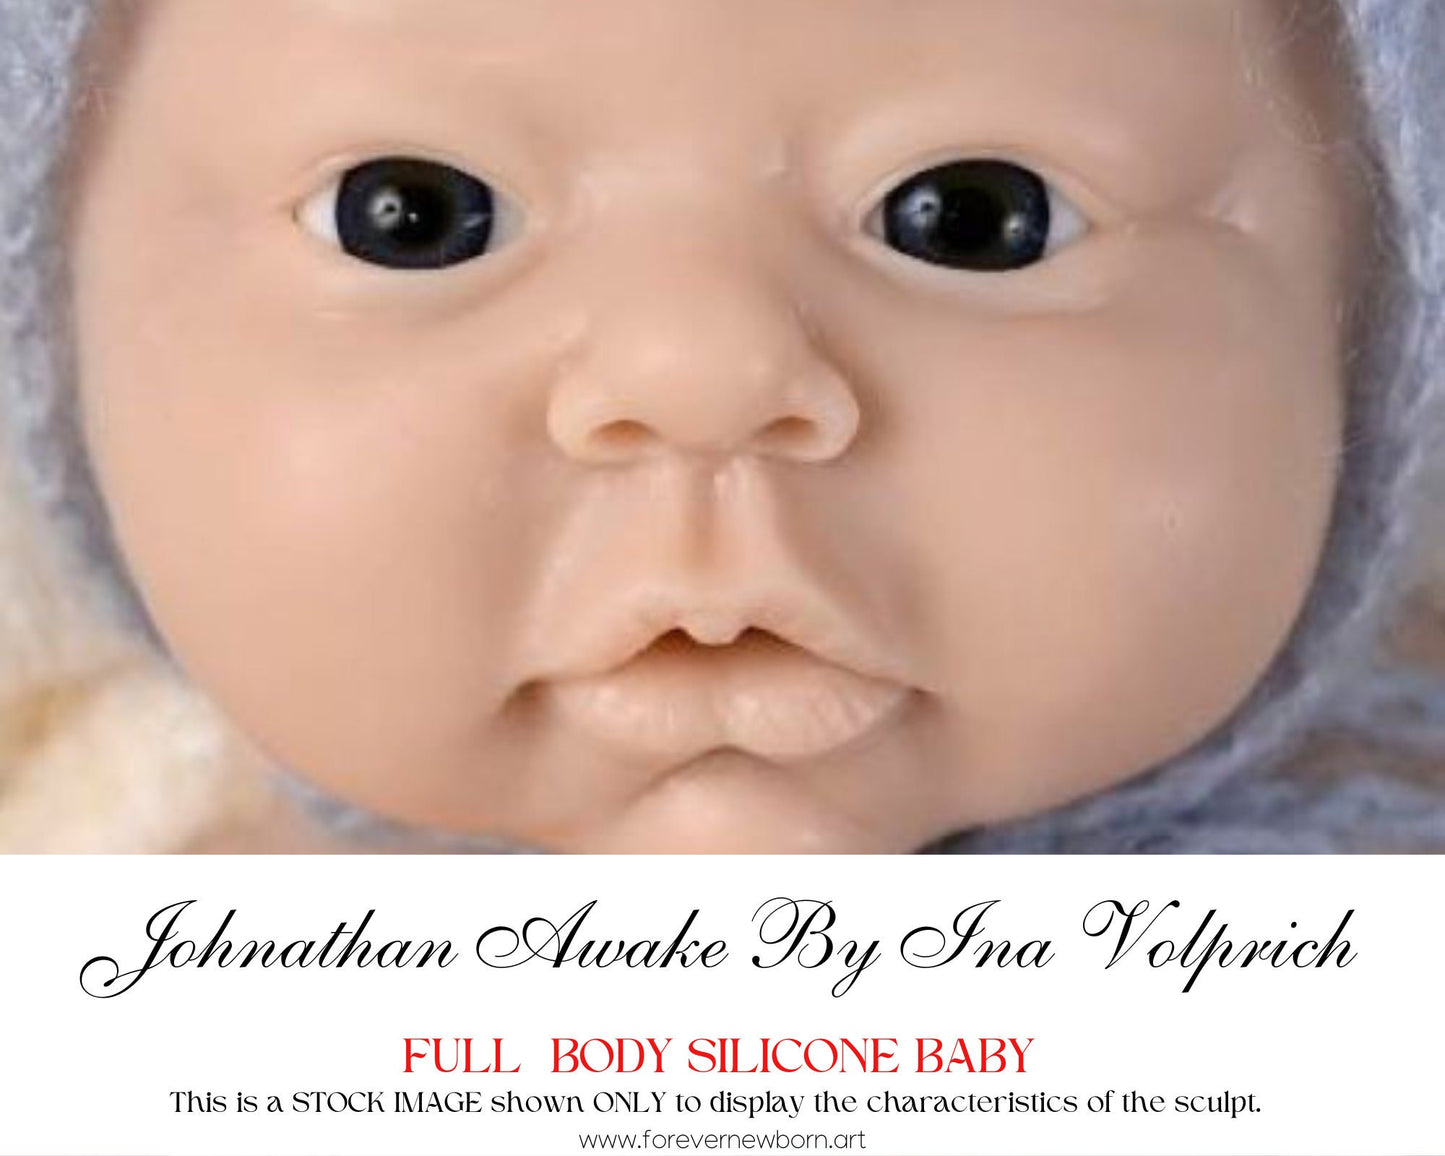 Custom FULL-BODY **Boy** Silicone Johnathan Awake By Ina Volprich (18 inches 7.5 lbs) *includes pictures of my own work in silicone.